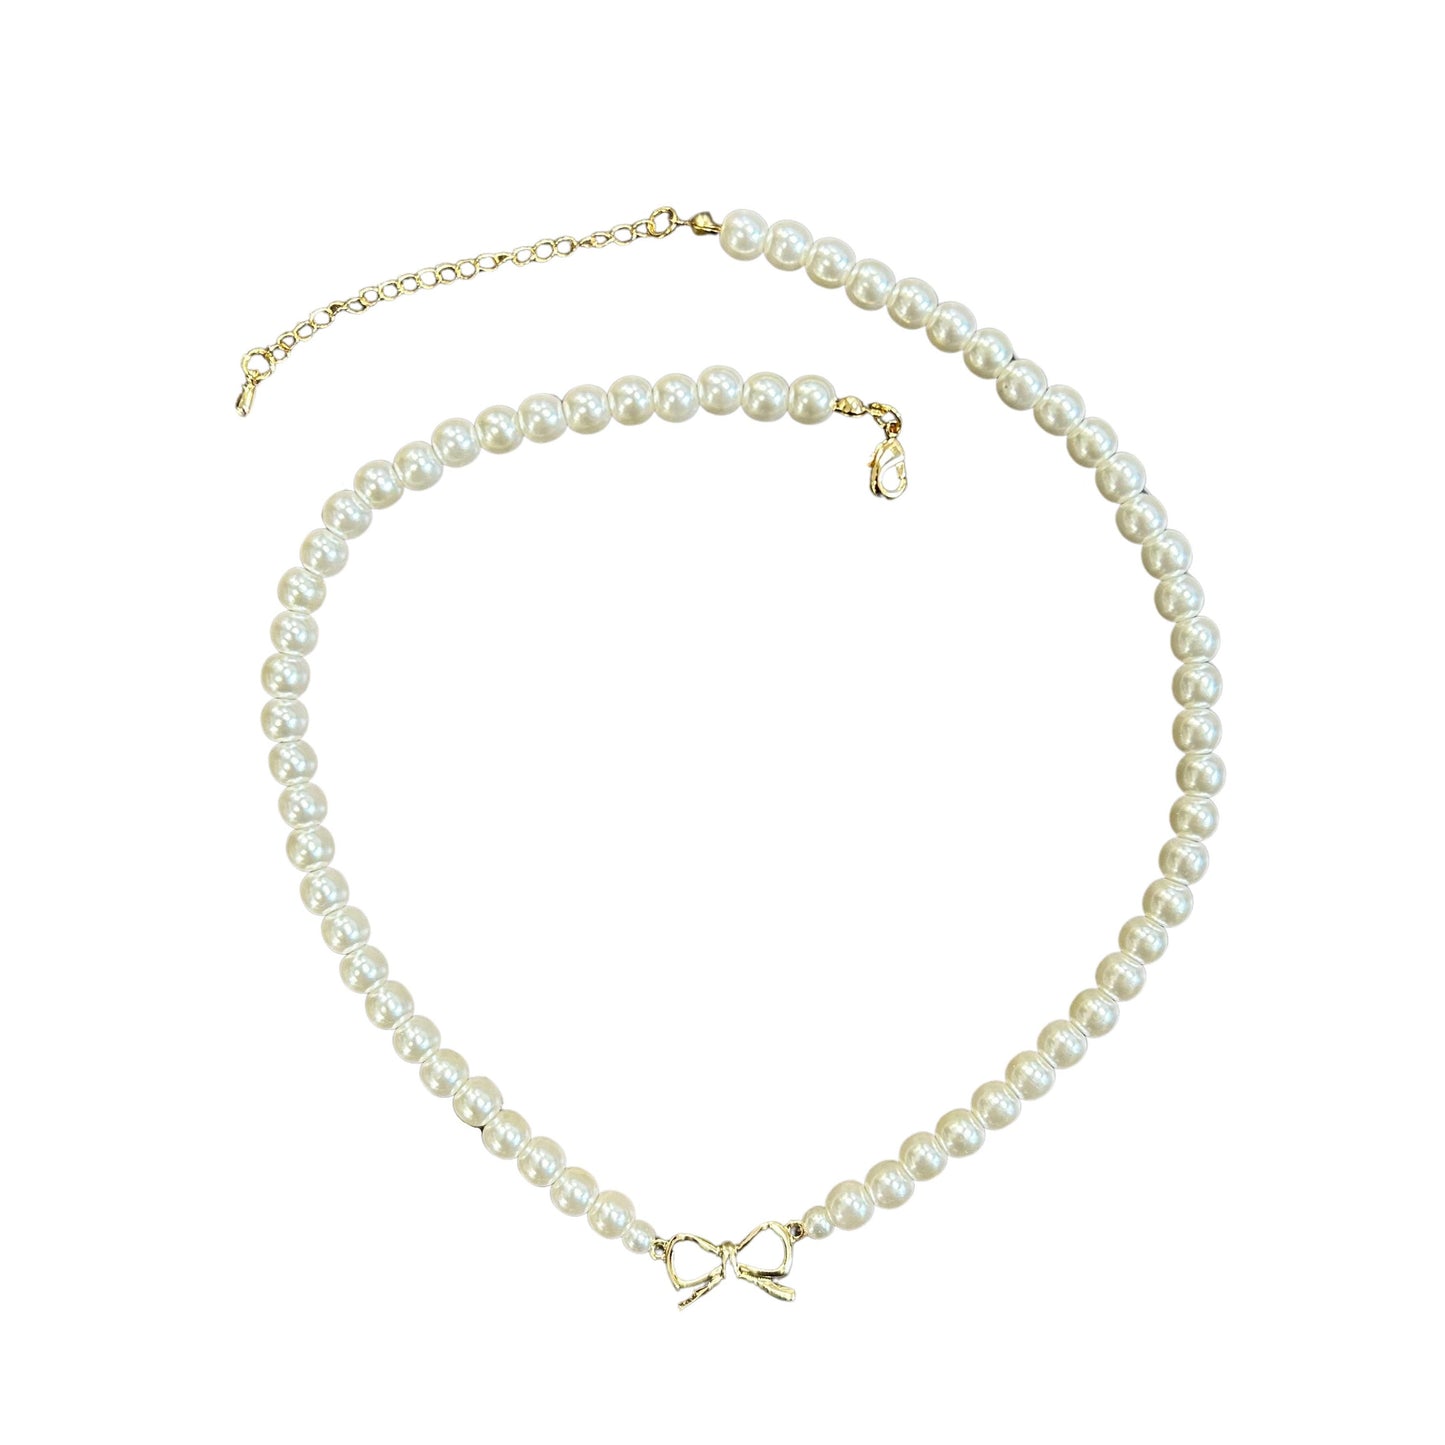 Full Pearl Necklace With Gold Bow Center Charm